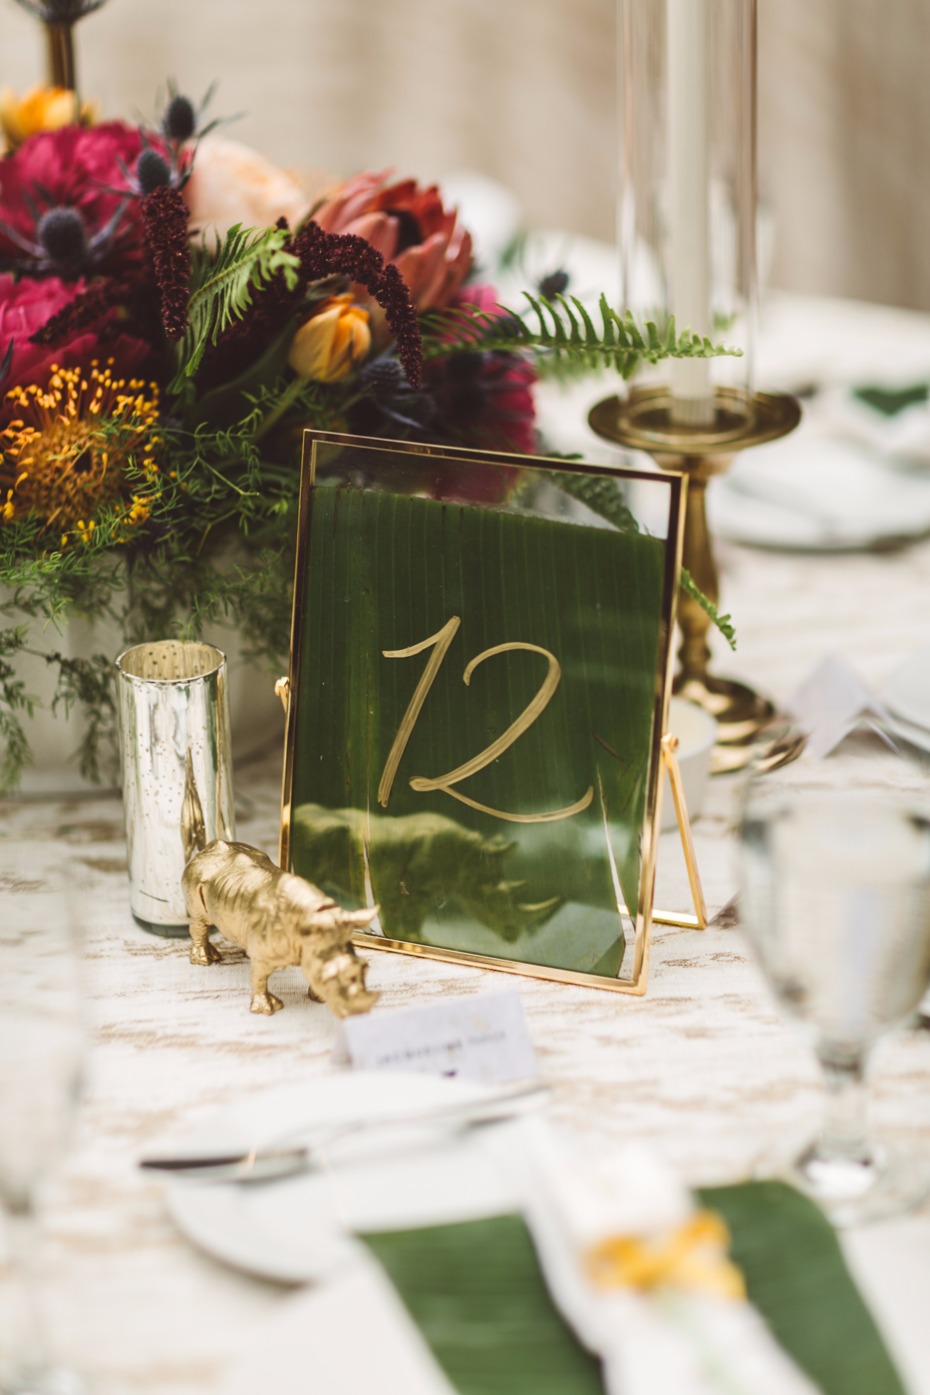 Framed table numbers